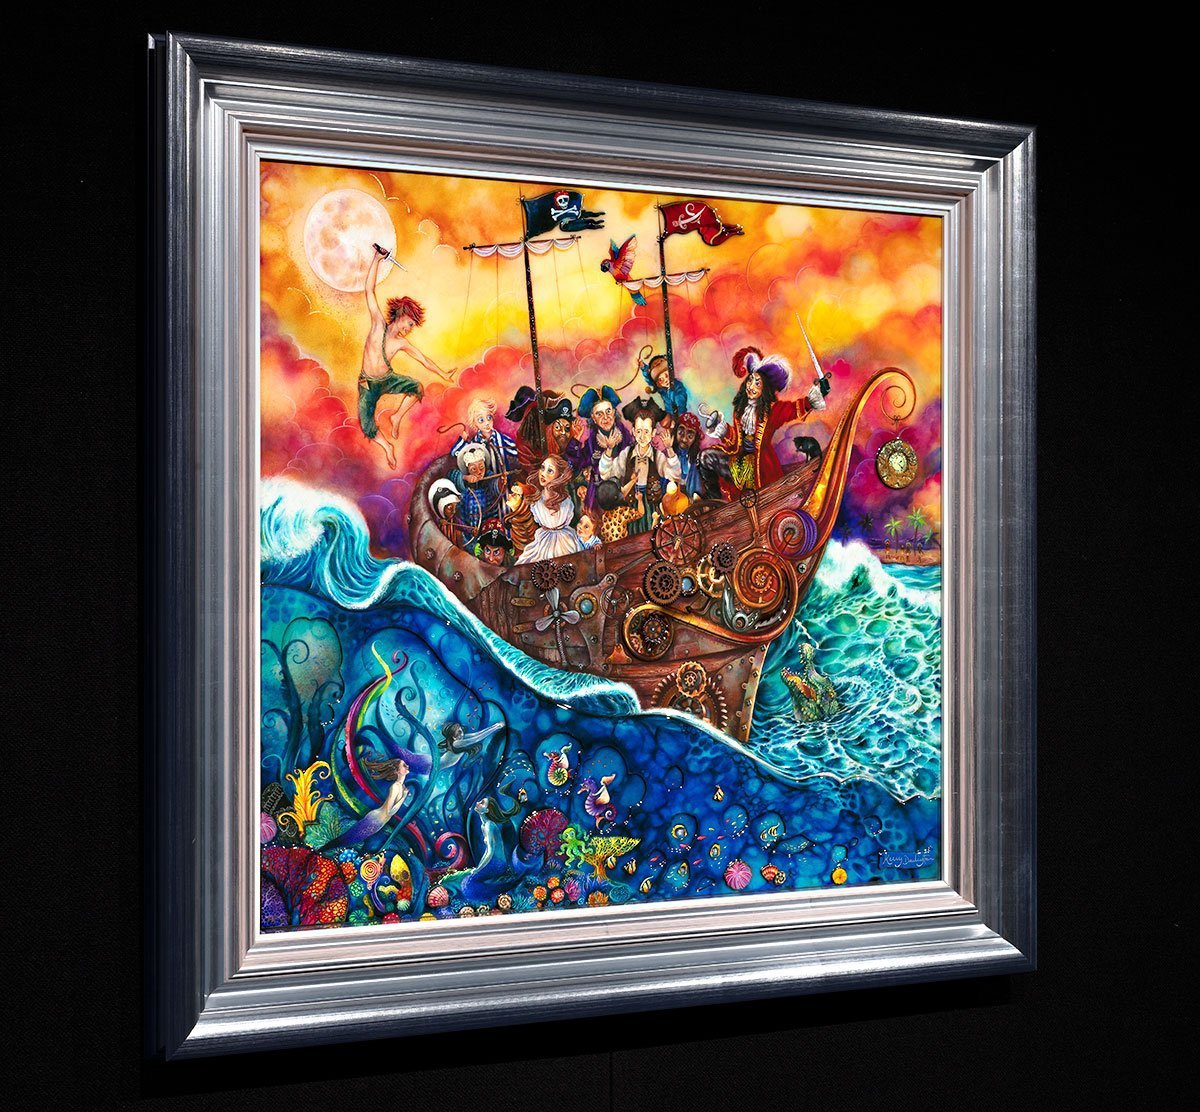 The Pirate Ship - Edition - SOLD OUT Kerry Darlington The Pirate Ship - Edition - SOLD OUT